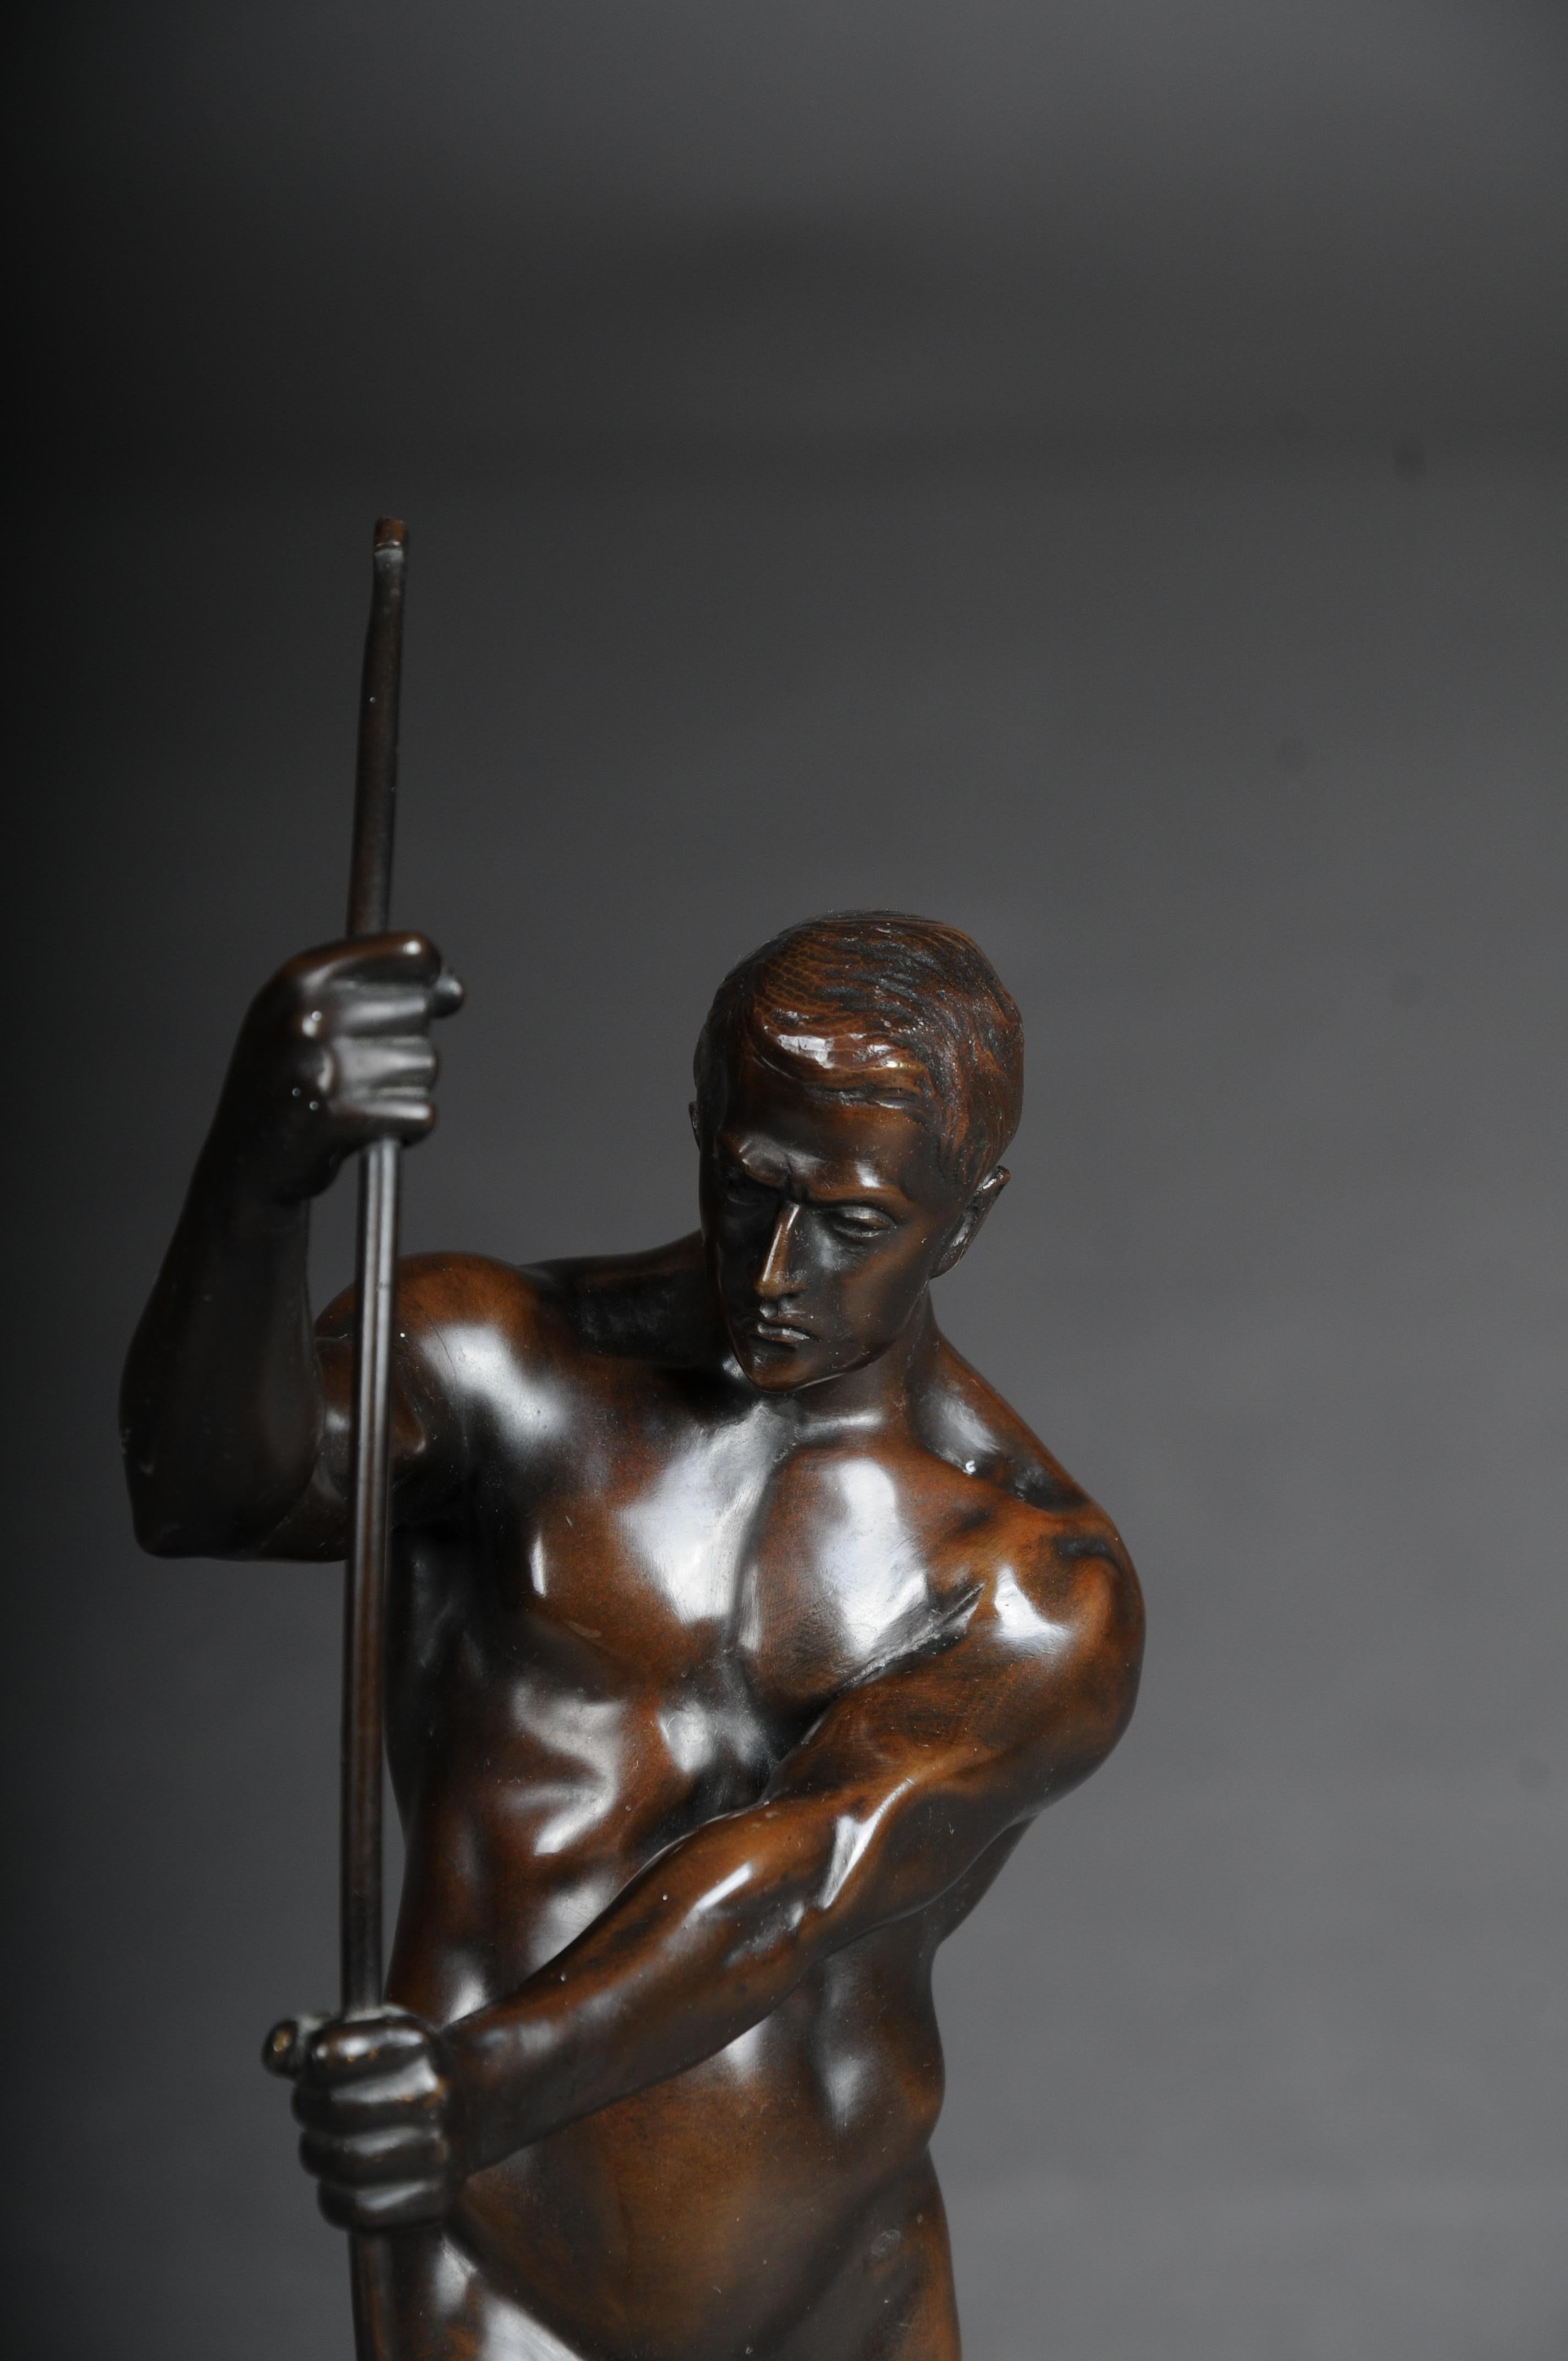 Beautiful bronze figure, The Bowman, signed Riese, 20th century

H. Riese - Bronze figure of a bowman, 20th century. Patinated bronze nude of an athletic man drawing a longbow. On a square plinth, signed on the right. Light dark marble base.